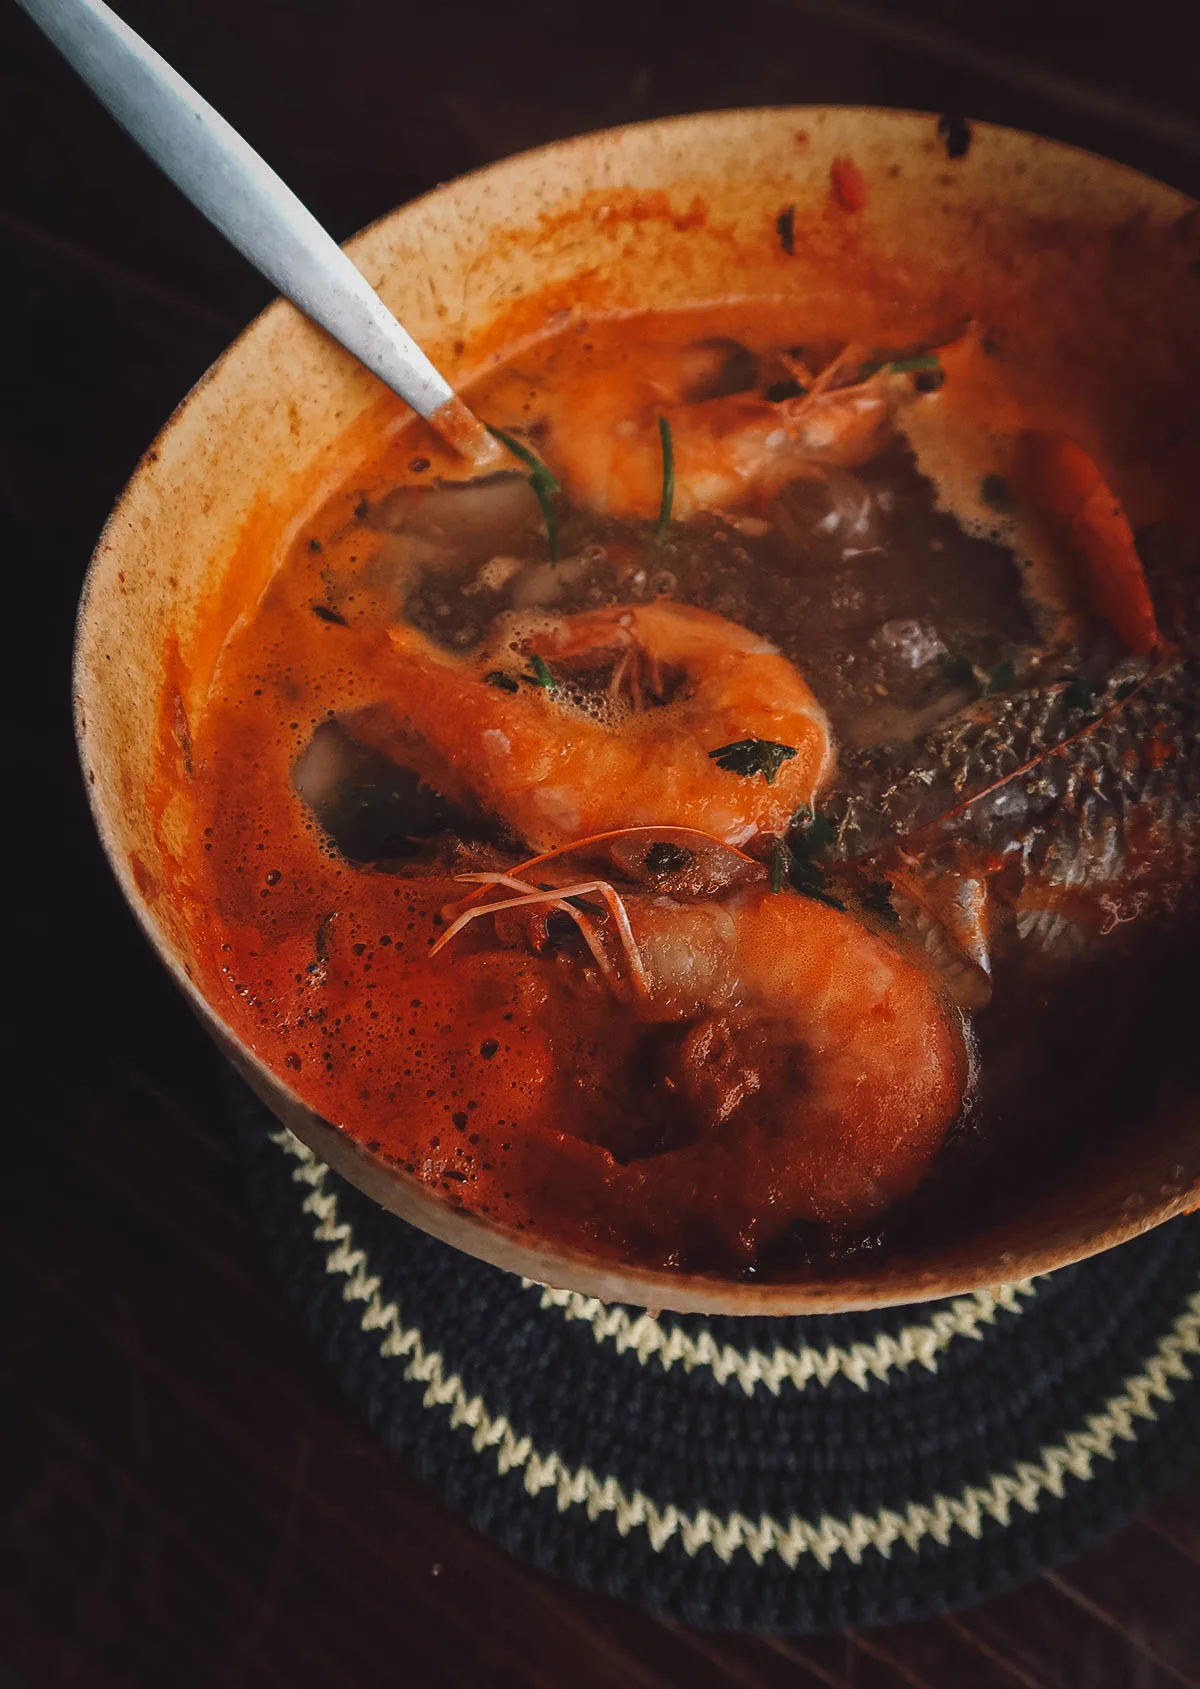 Caldo de piedra or Oaxacan seafood soup cooked with a heated river stone